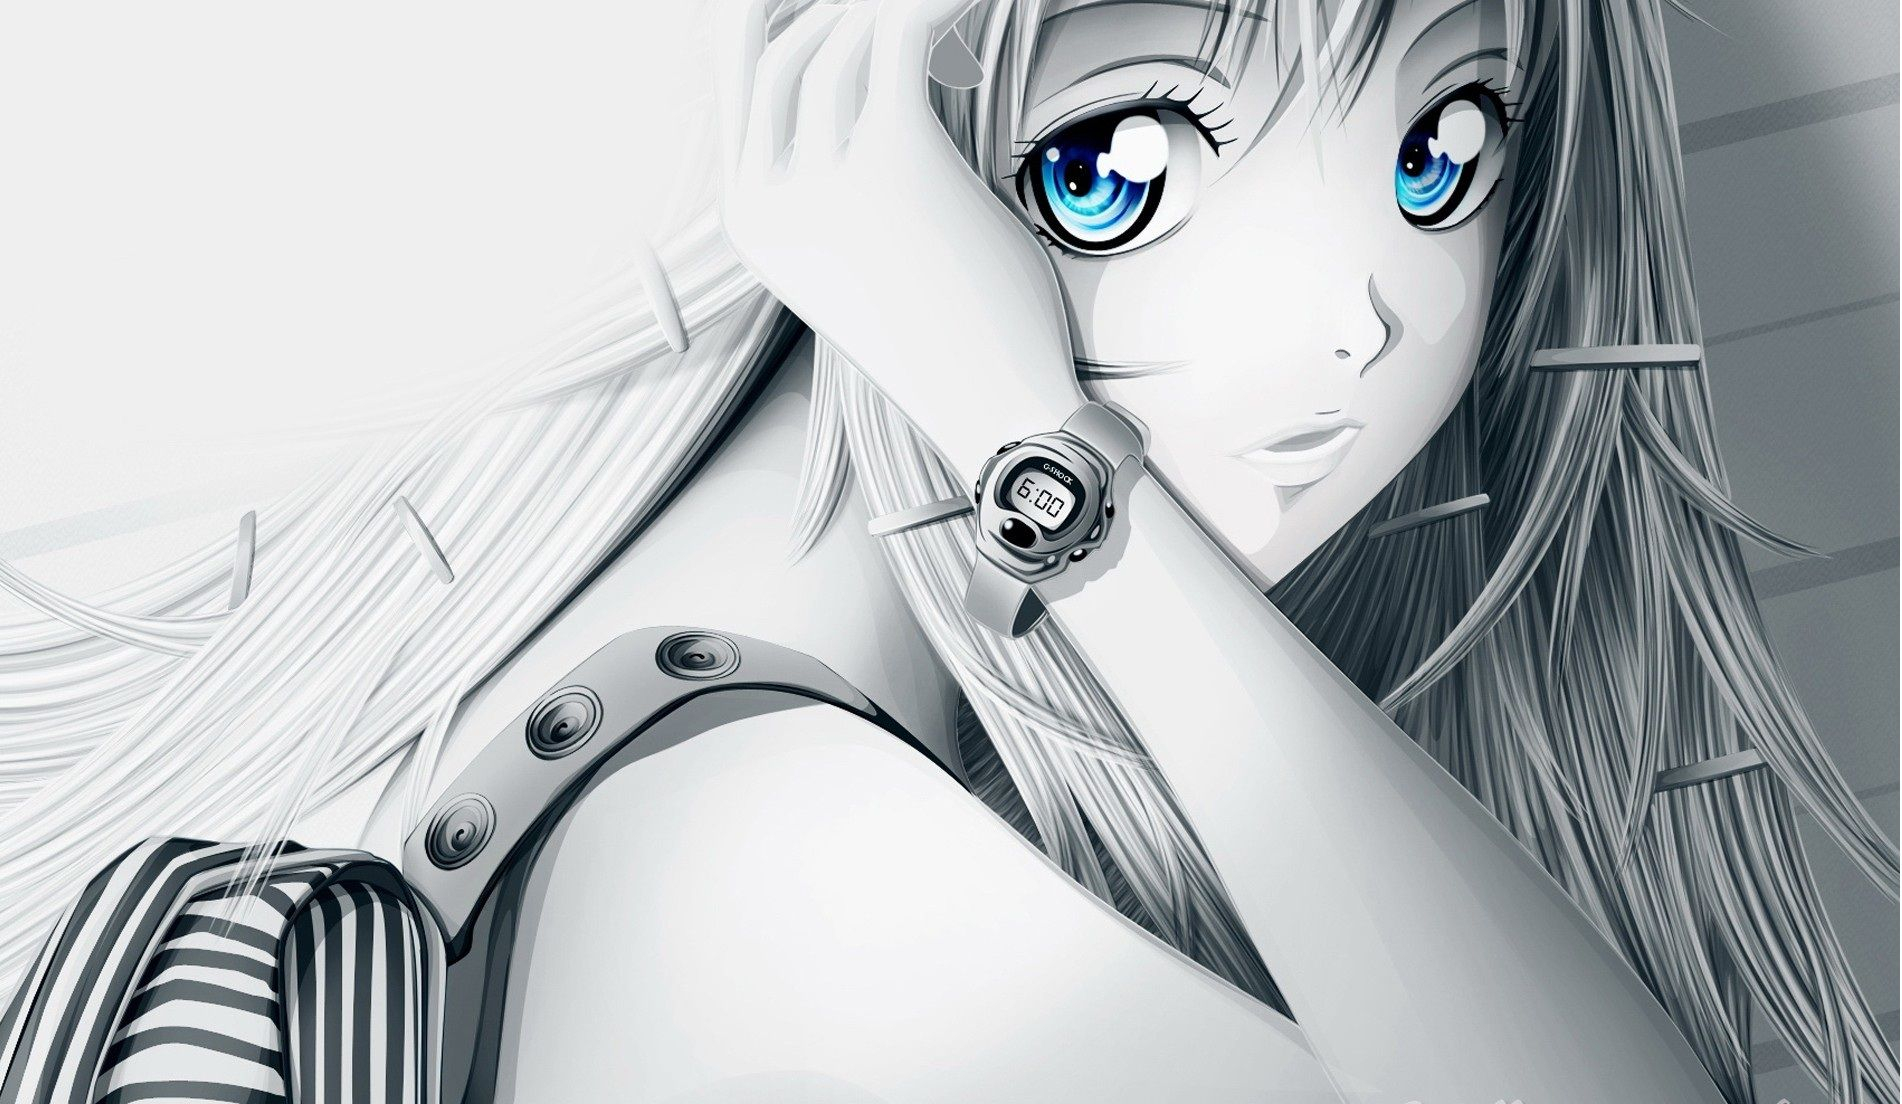 Anime Girl Hd Wallpaper For Android - 1023x594 Wallpaper 